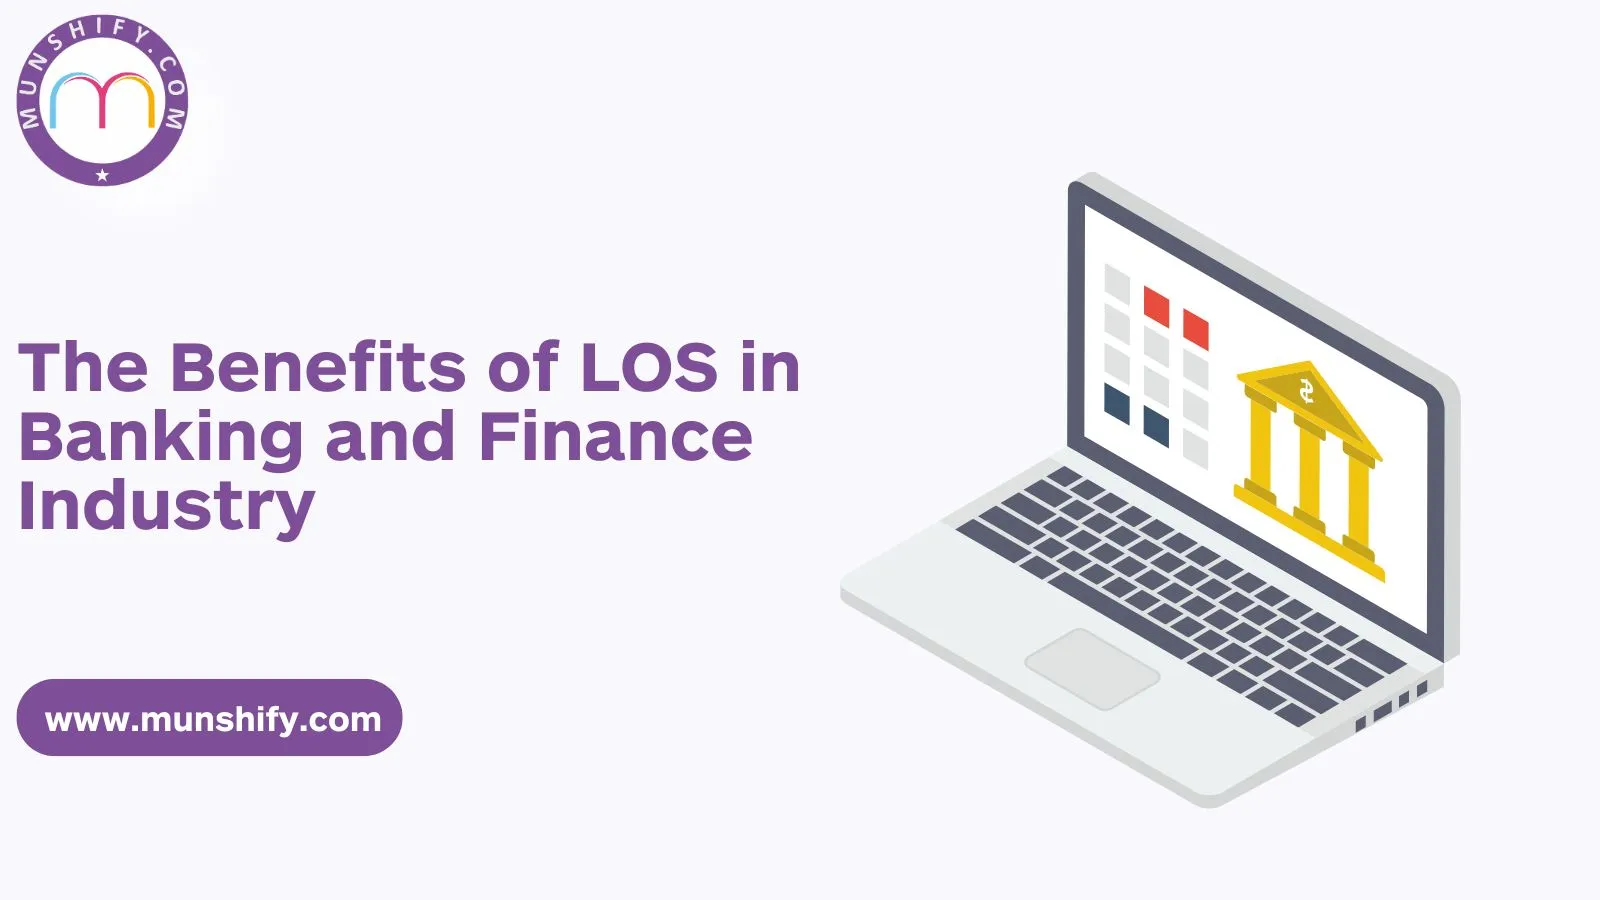 The Benefits of LOS in Banking and Finance Industry 